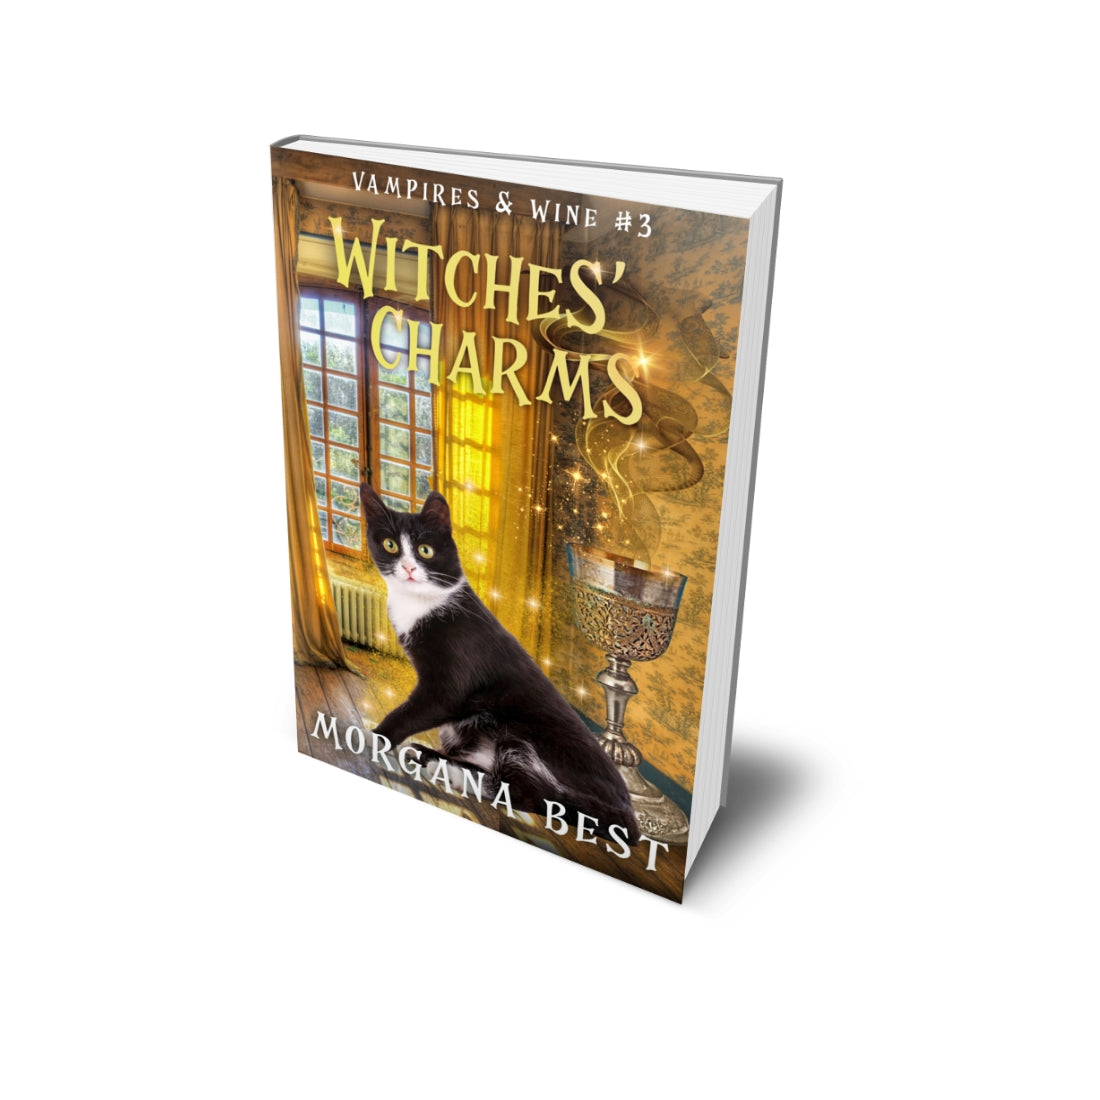 Witches Charms PAPERBACK cozy mystery